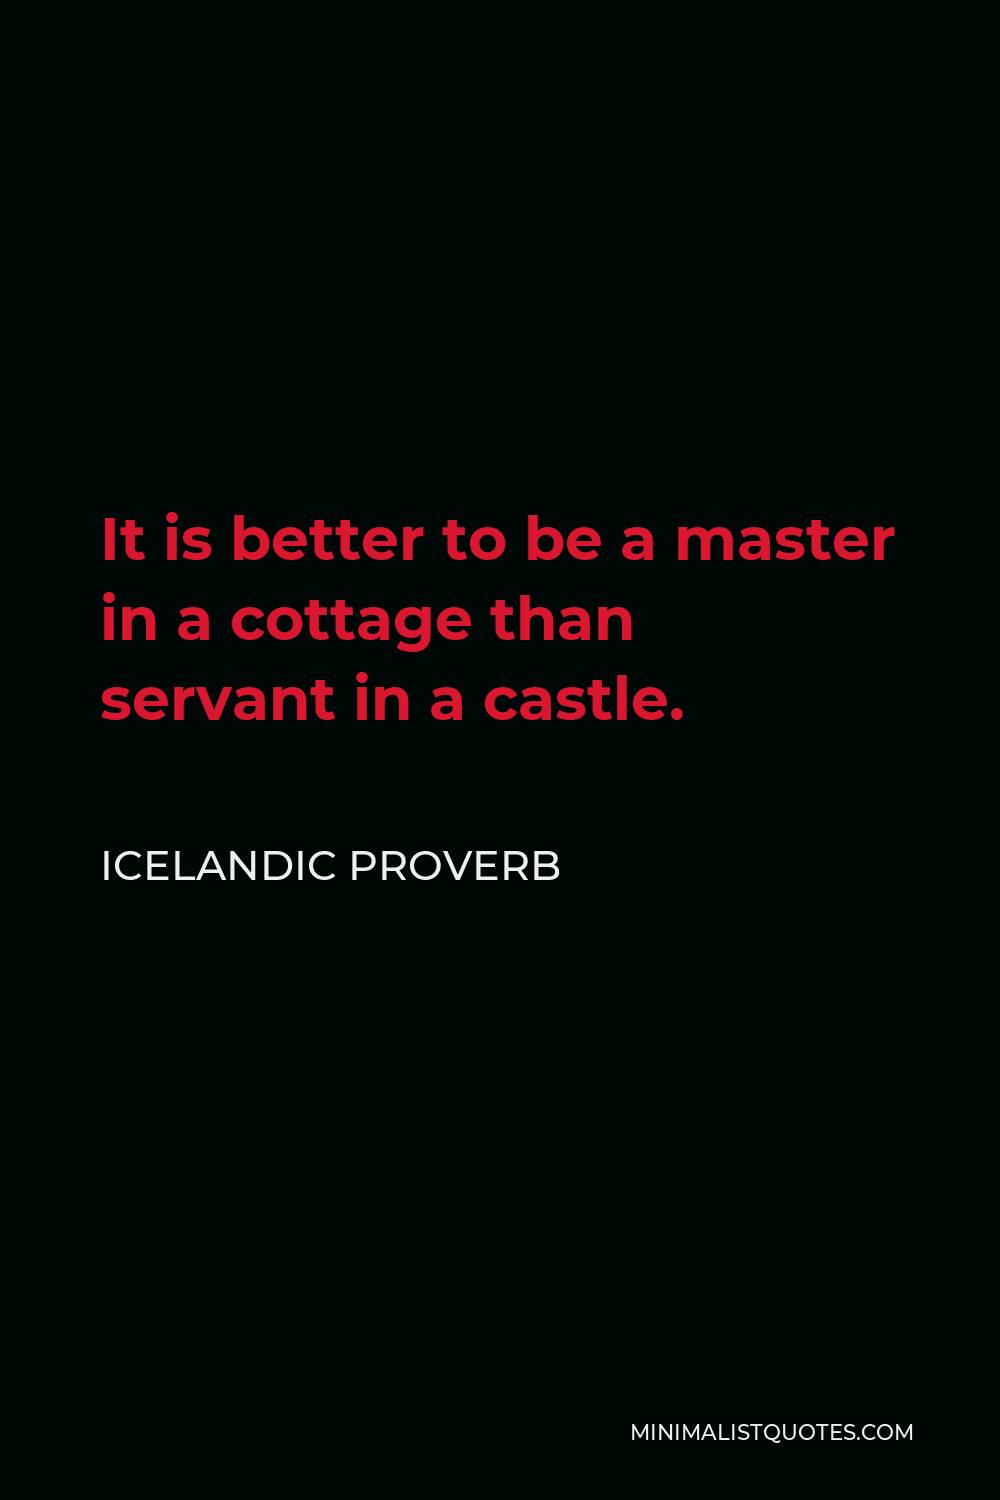 Icelandic Proverb Quote - It is better to be a master in a cottage than servant in a castle.